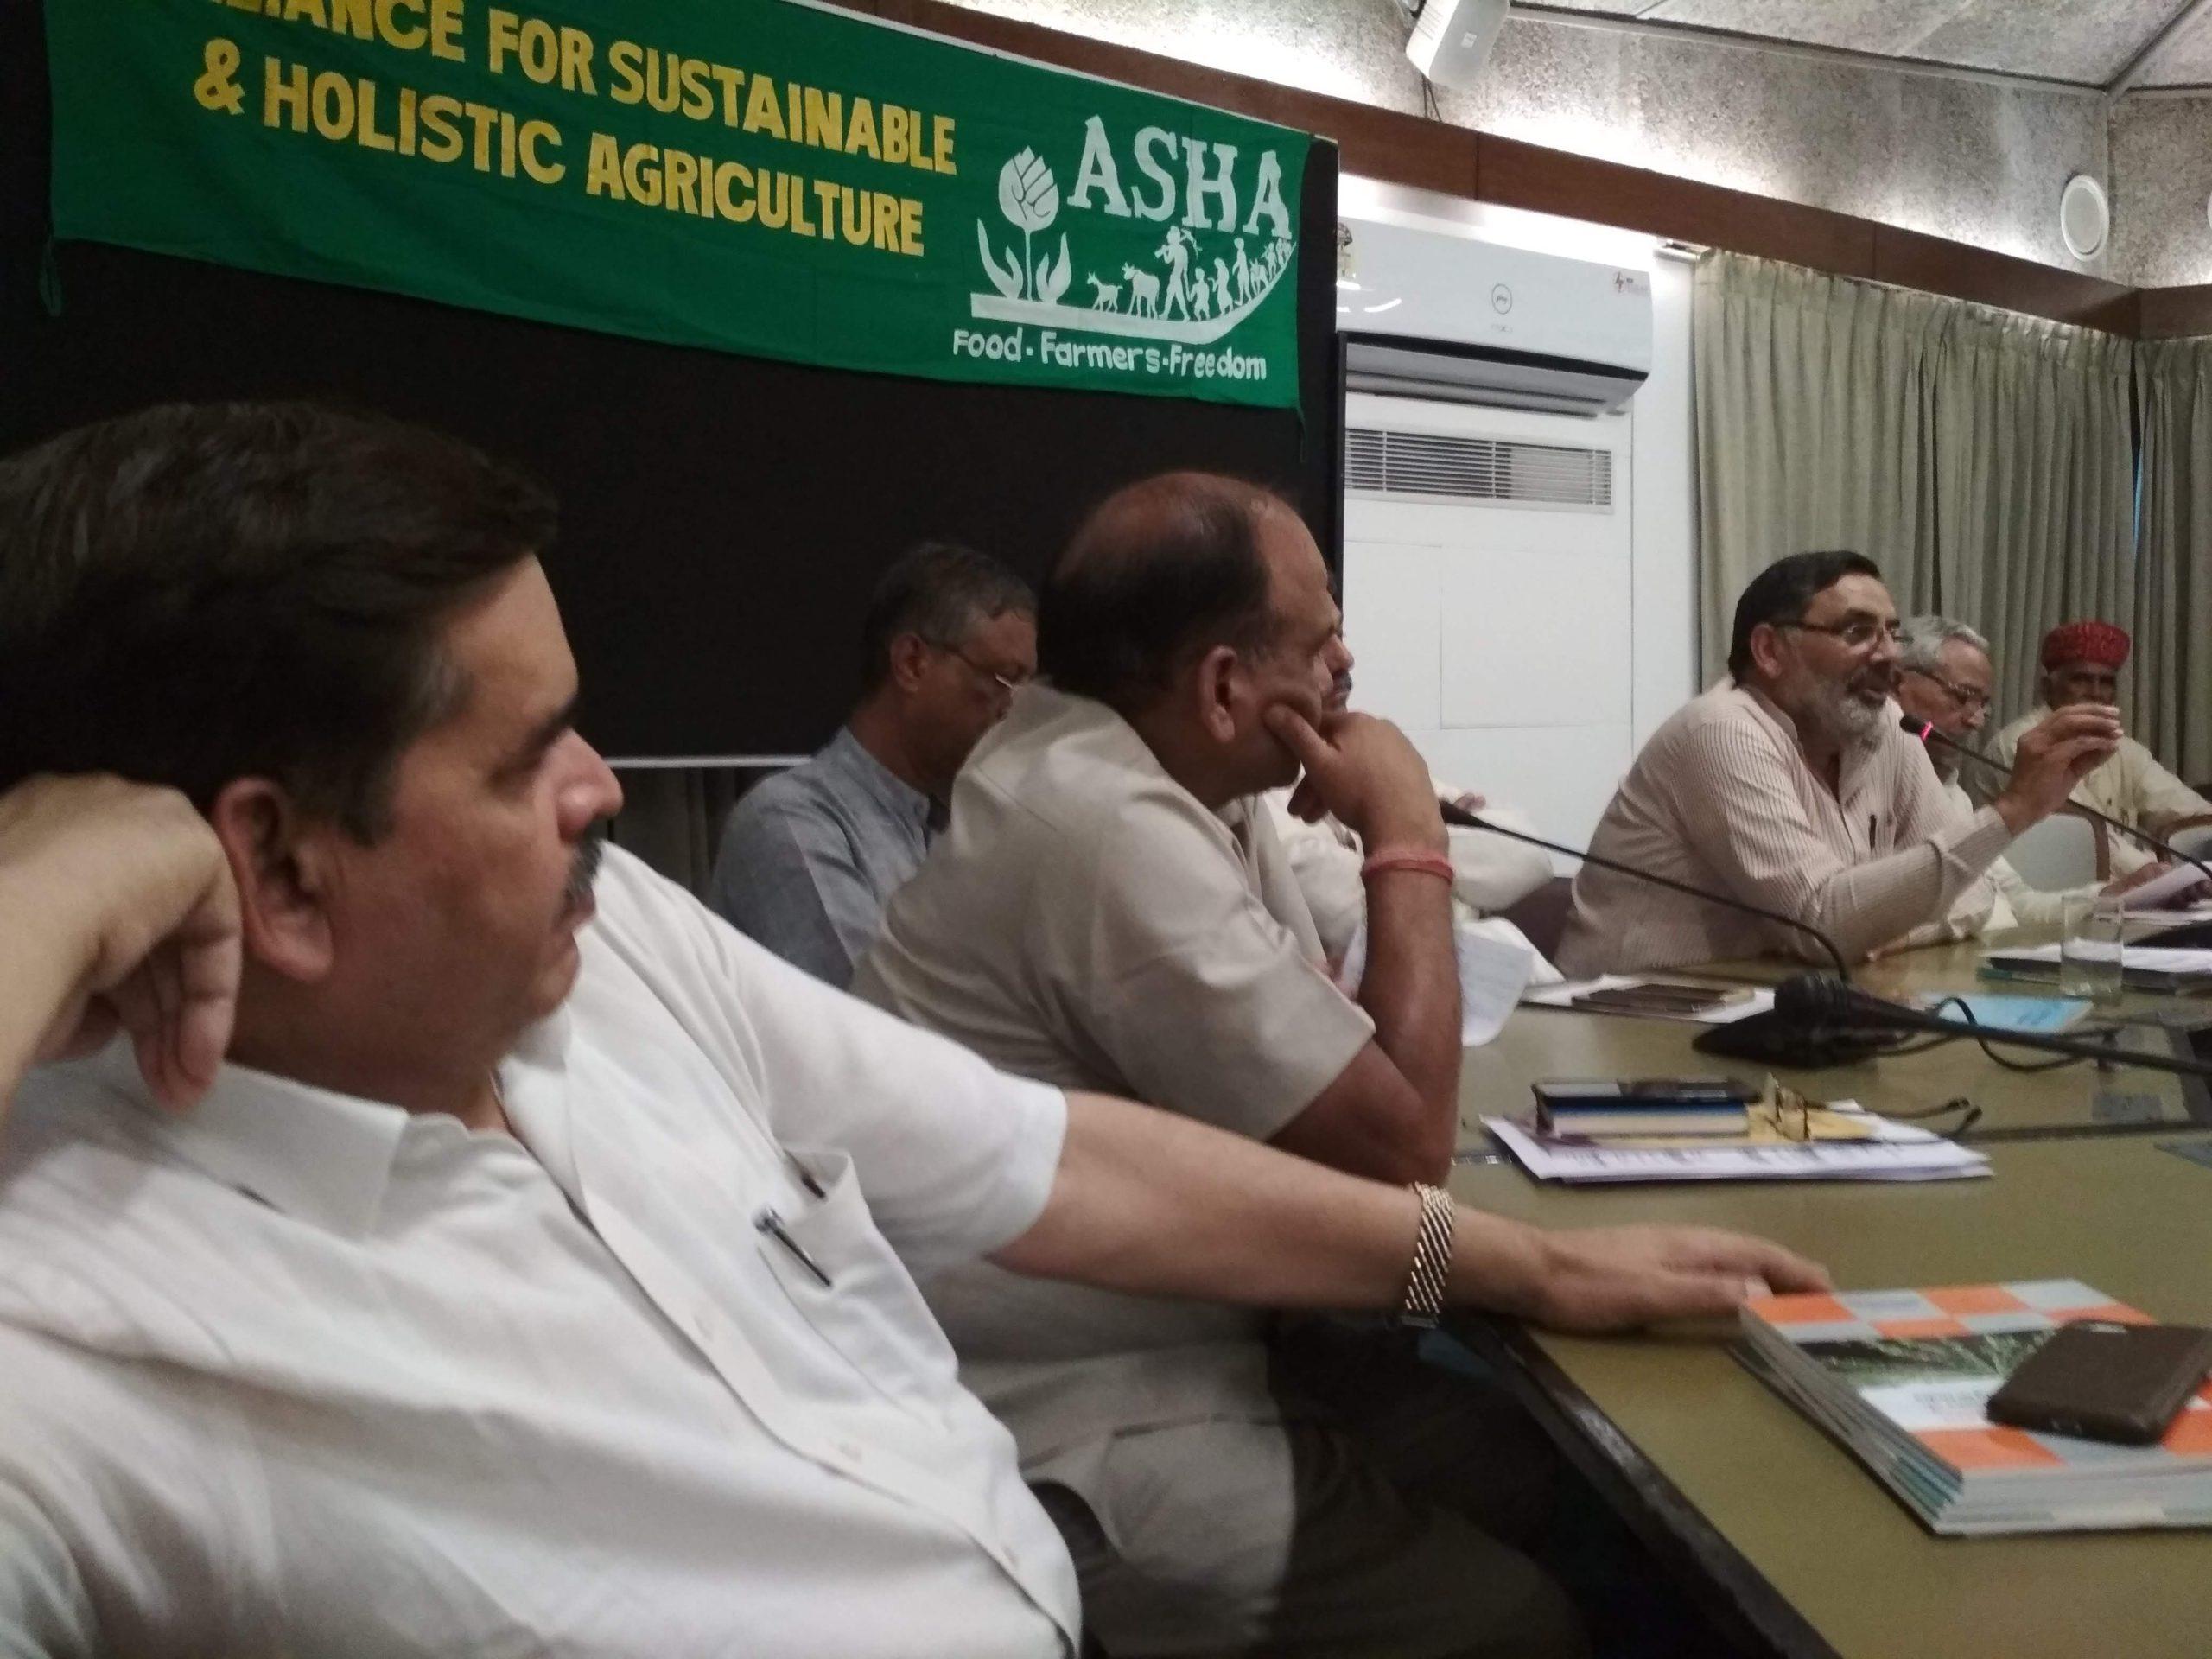 ASHA (Alliance for Sustainable and Holistic Agriculture)